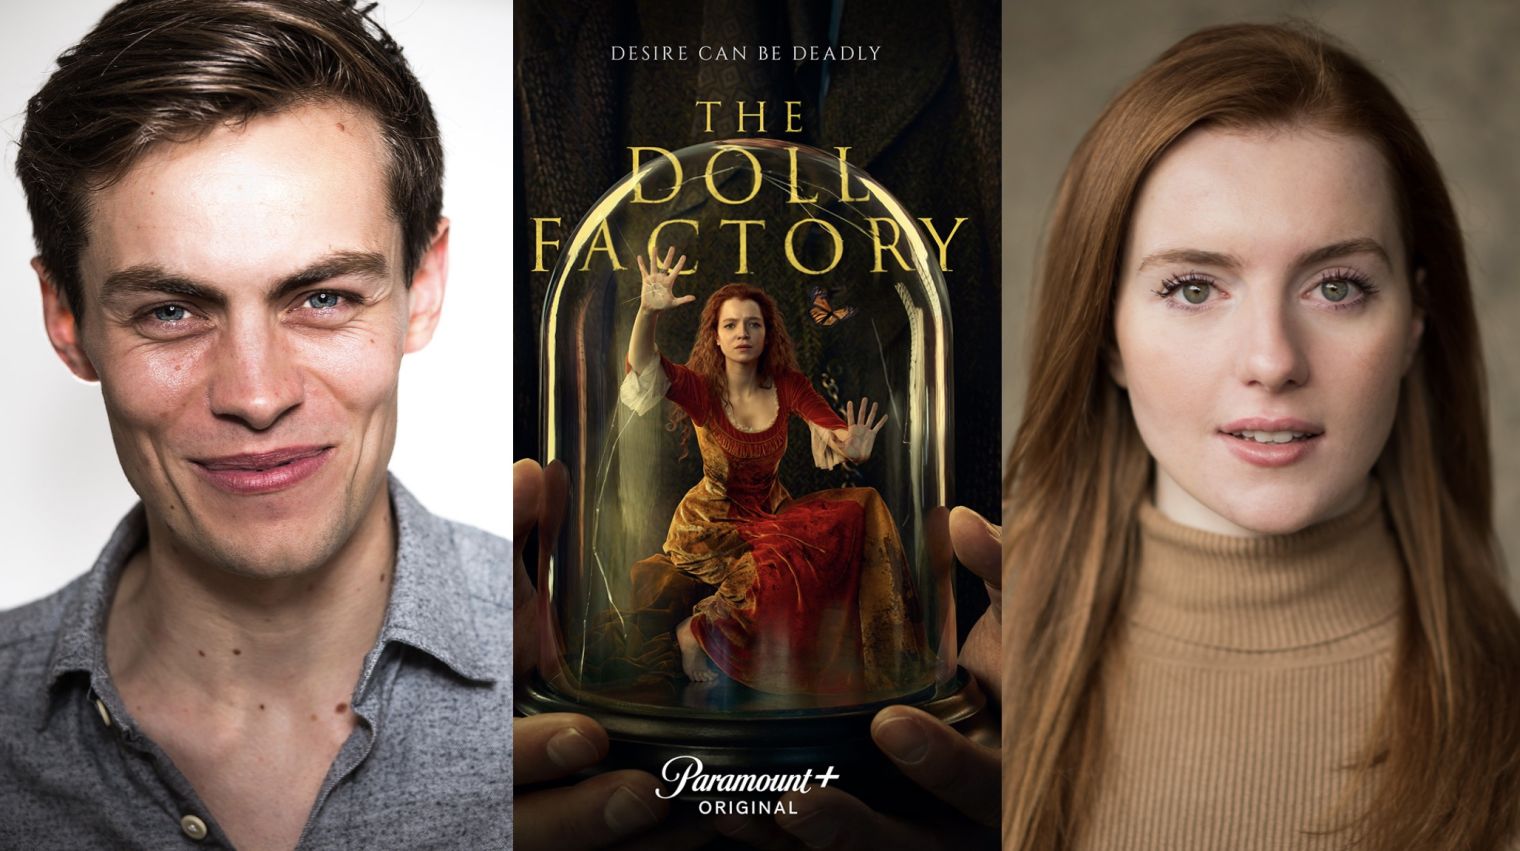  See Freddy Carter and Hannah Onslow in 'The Doll Factory' which premieres on Paramount+ today